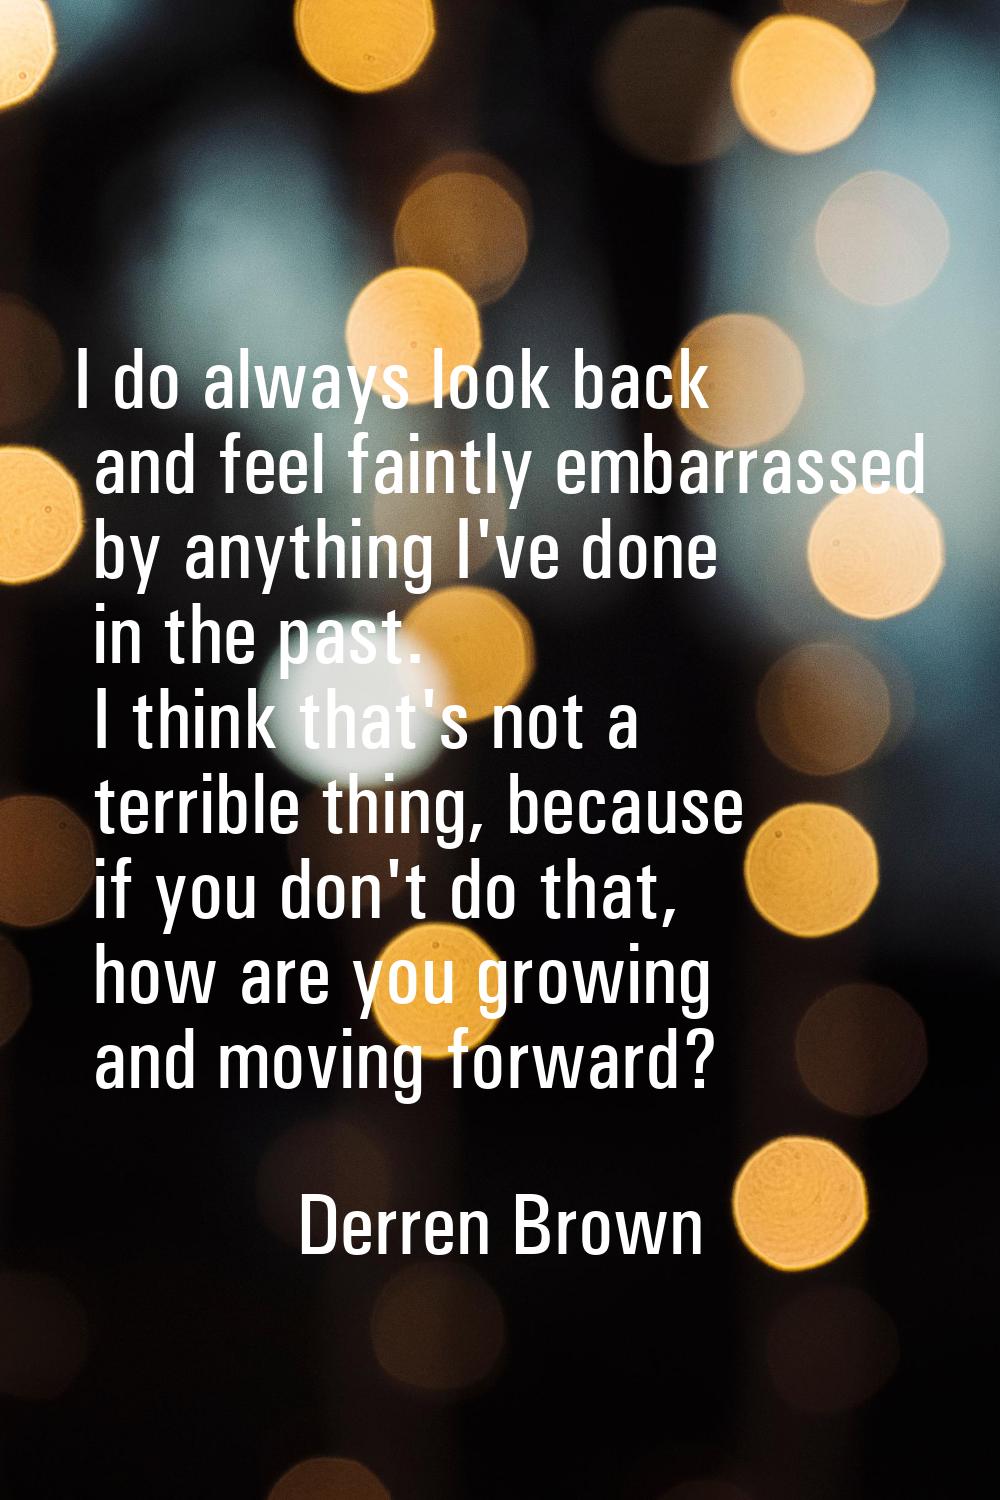 I do always look back and feel faintly embarrassed by anything I've done in the past. I think that'